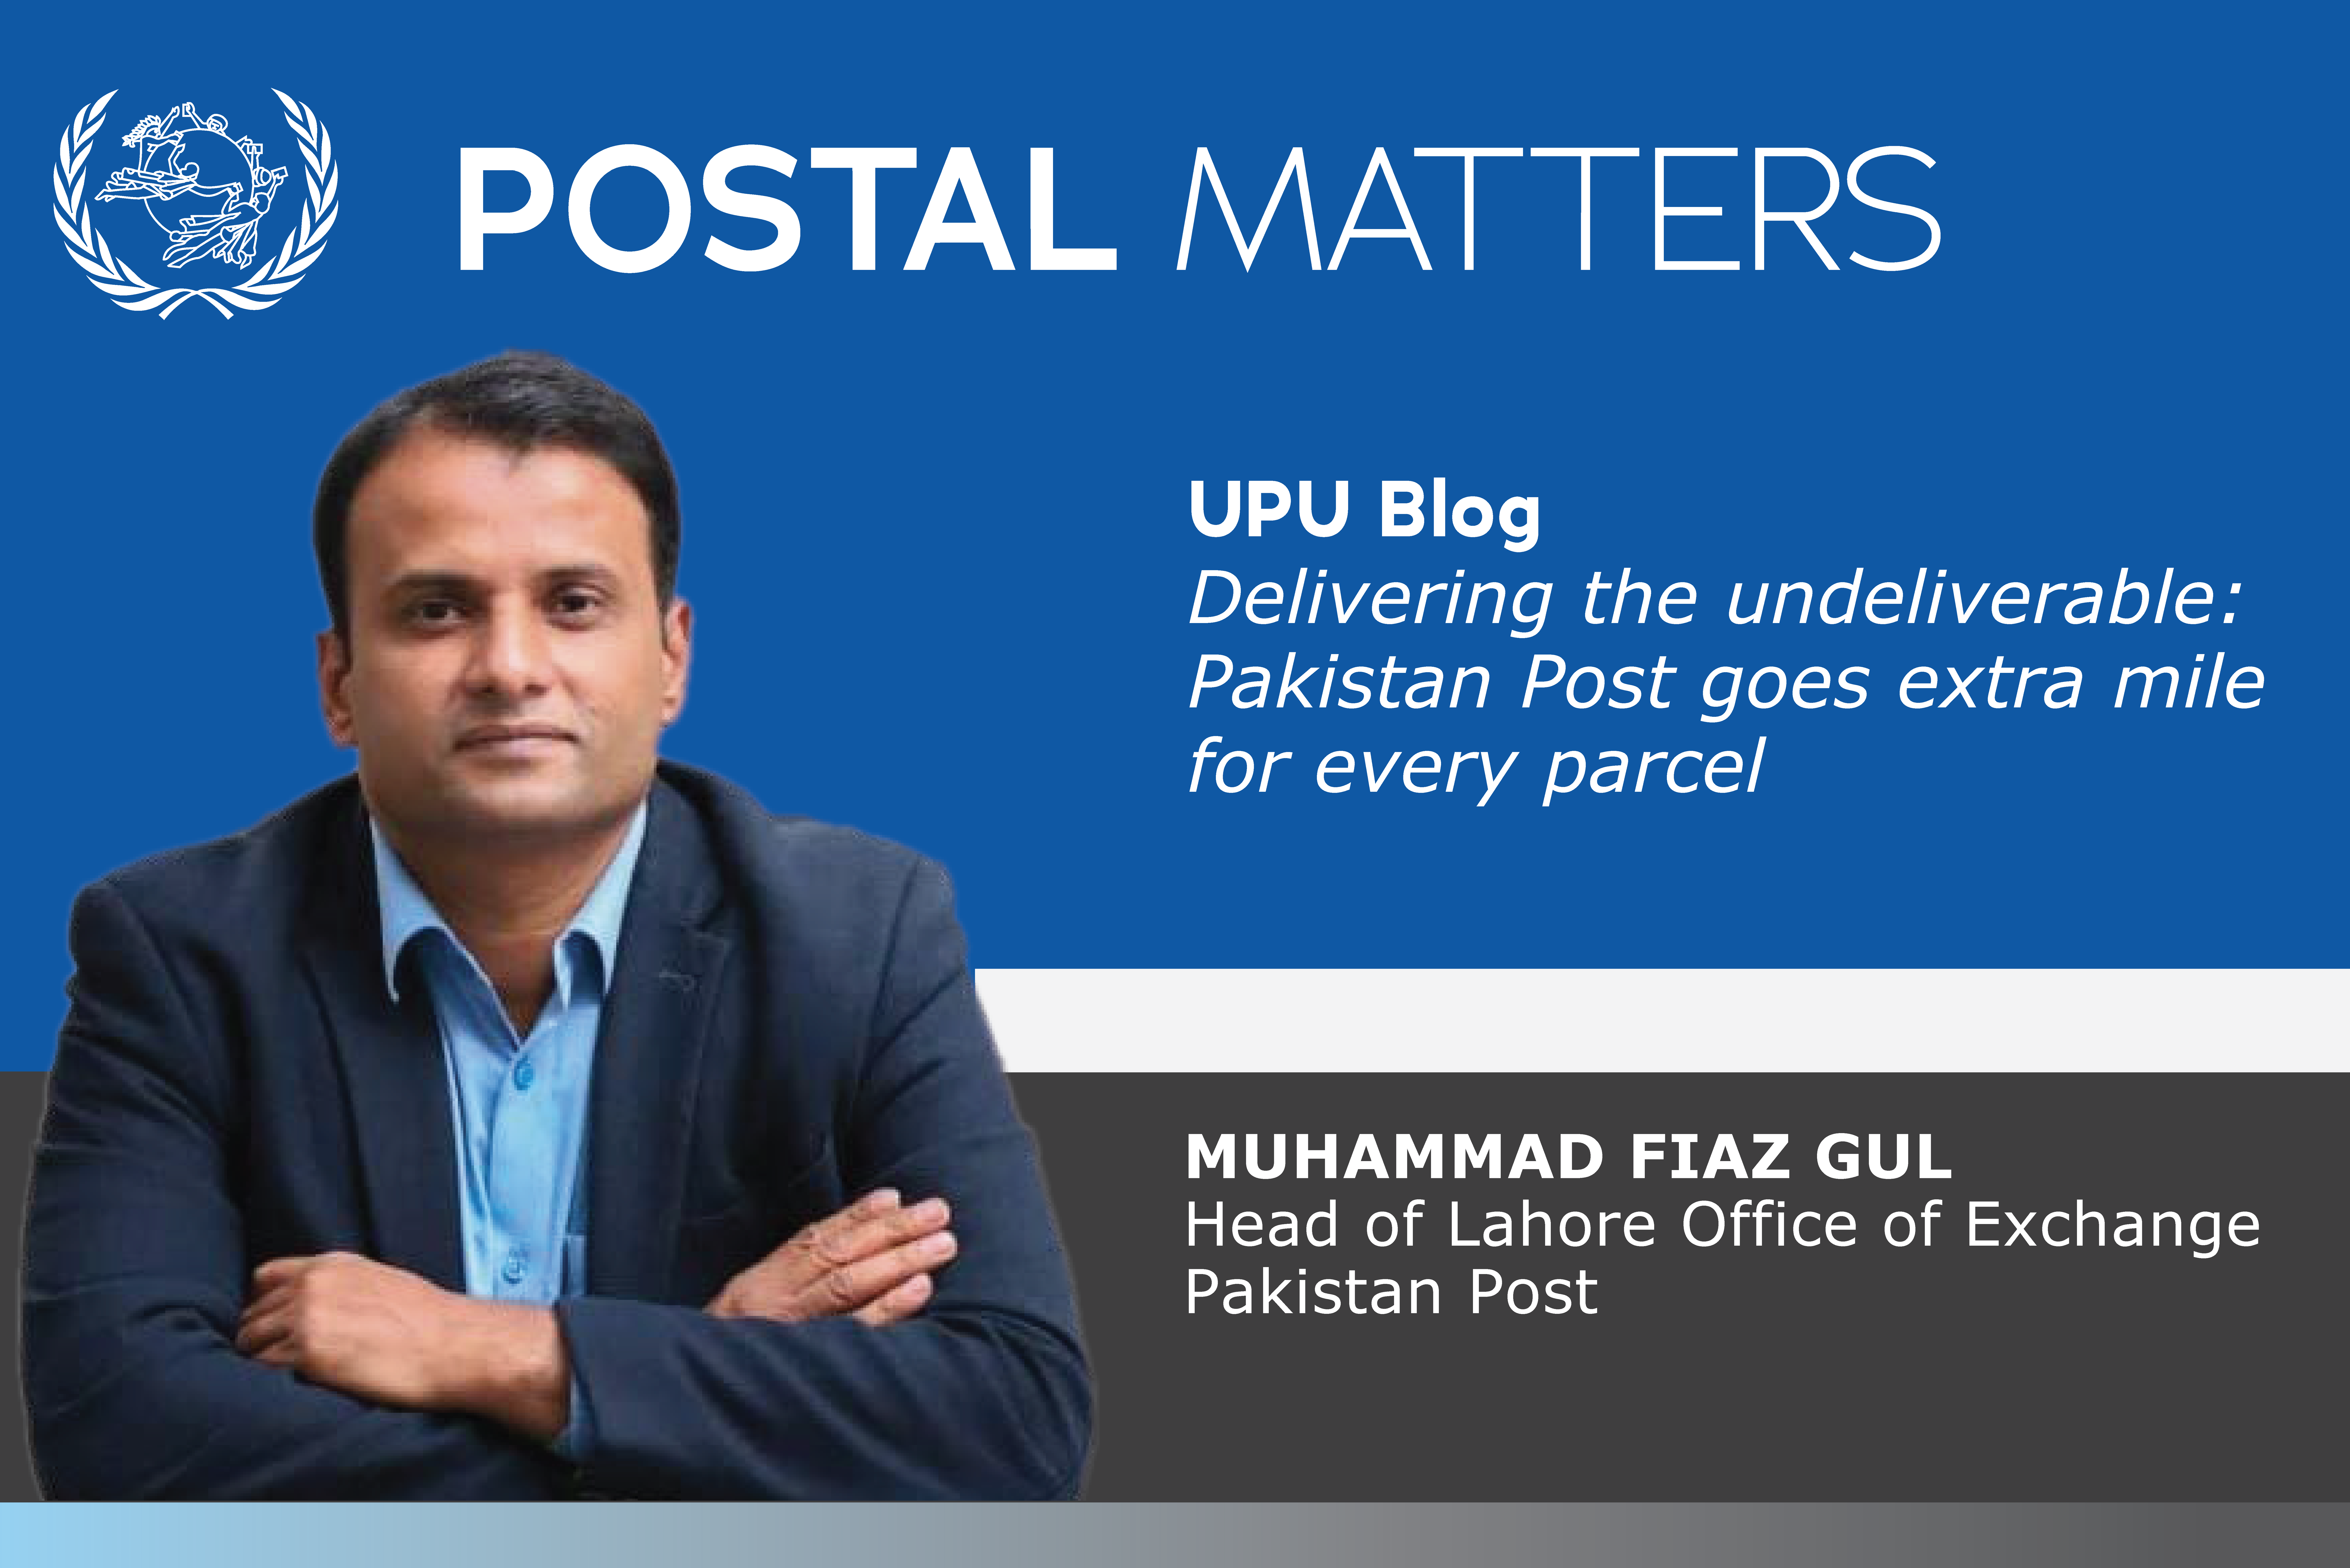 Delivering the undeliverable: Pakistan Post goes extra mile for every parcel